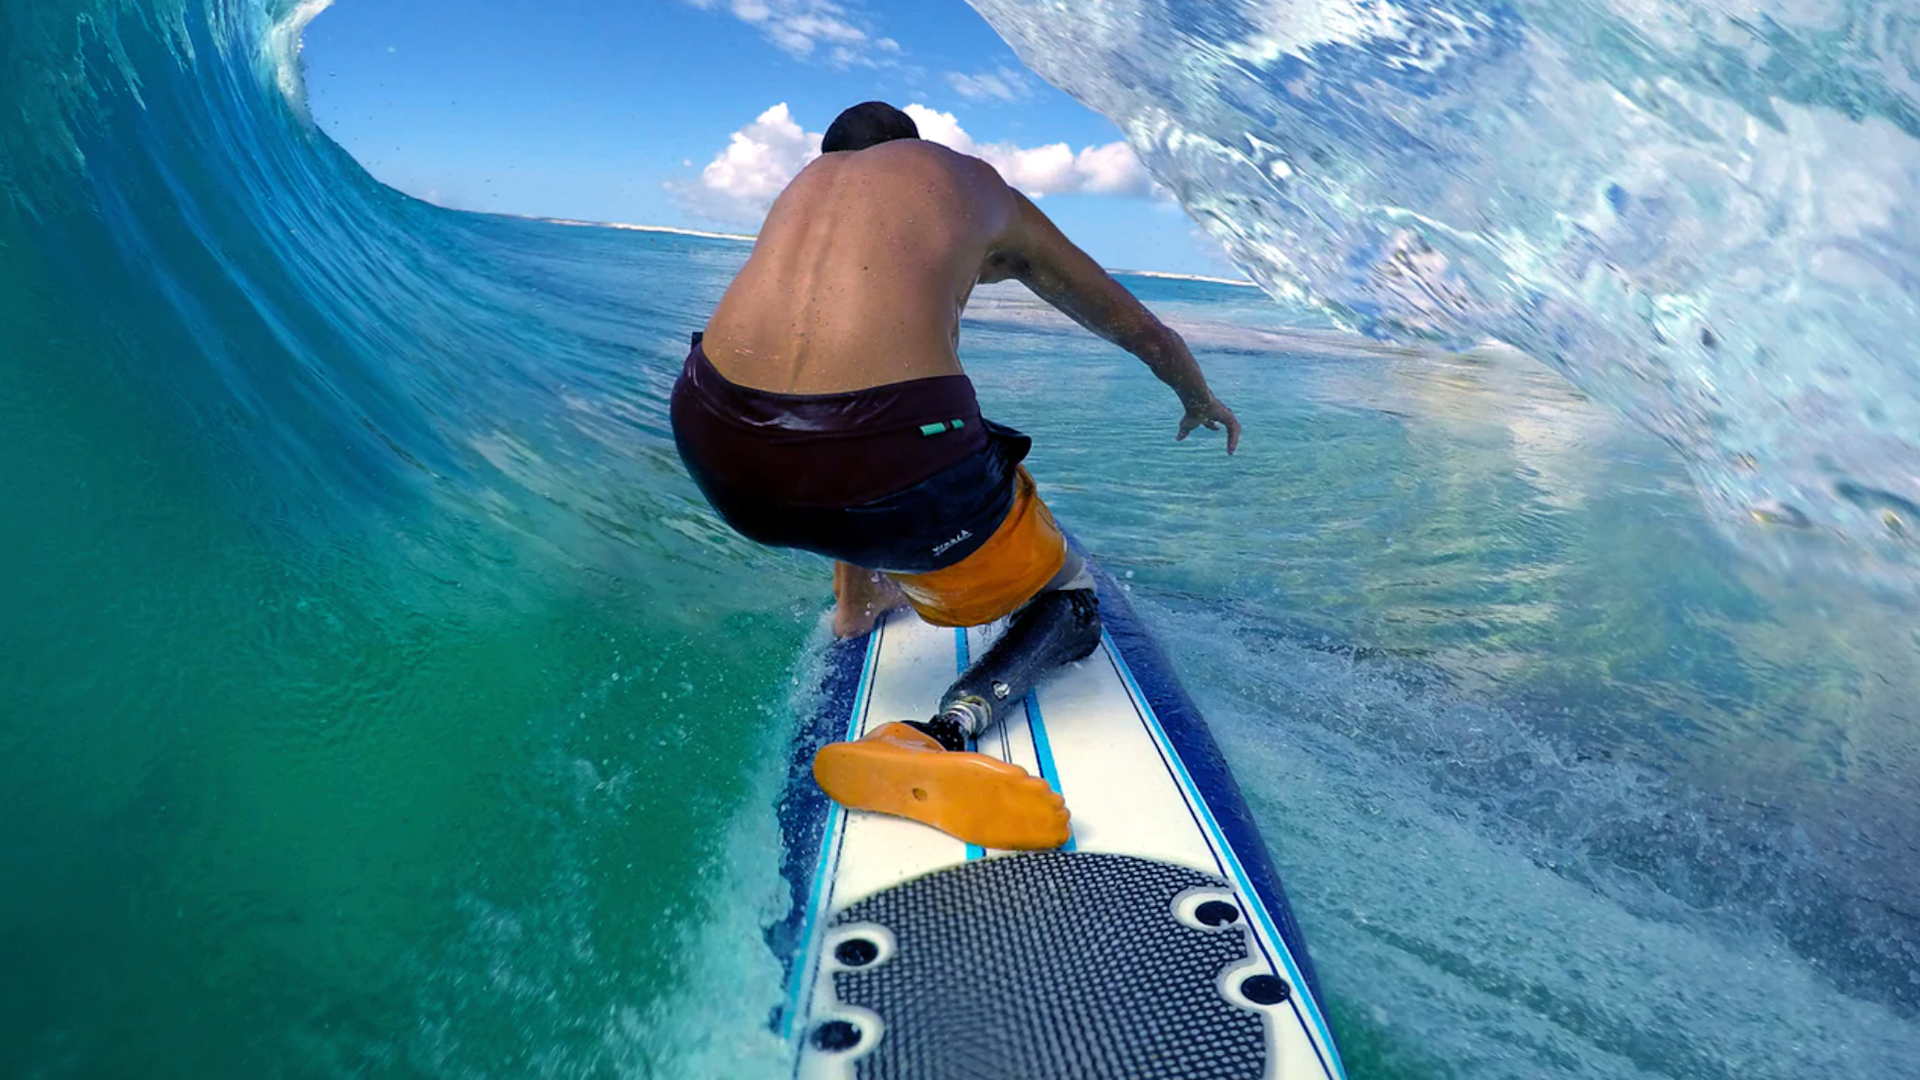 Surfer Dudes With Pets. – Island Surf Company